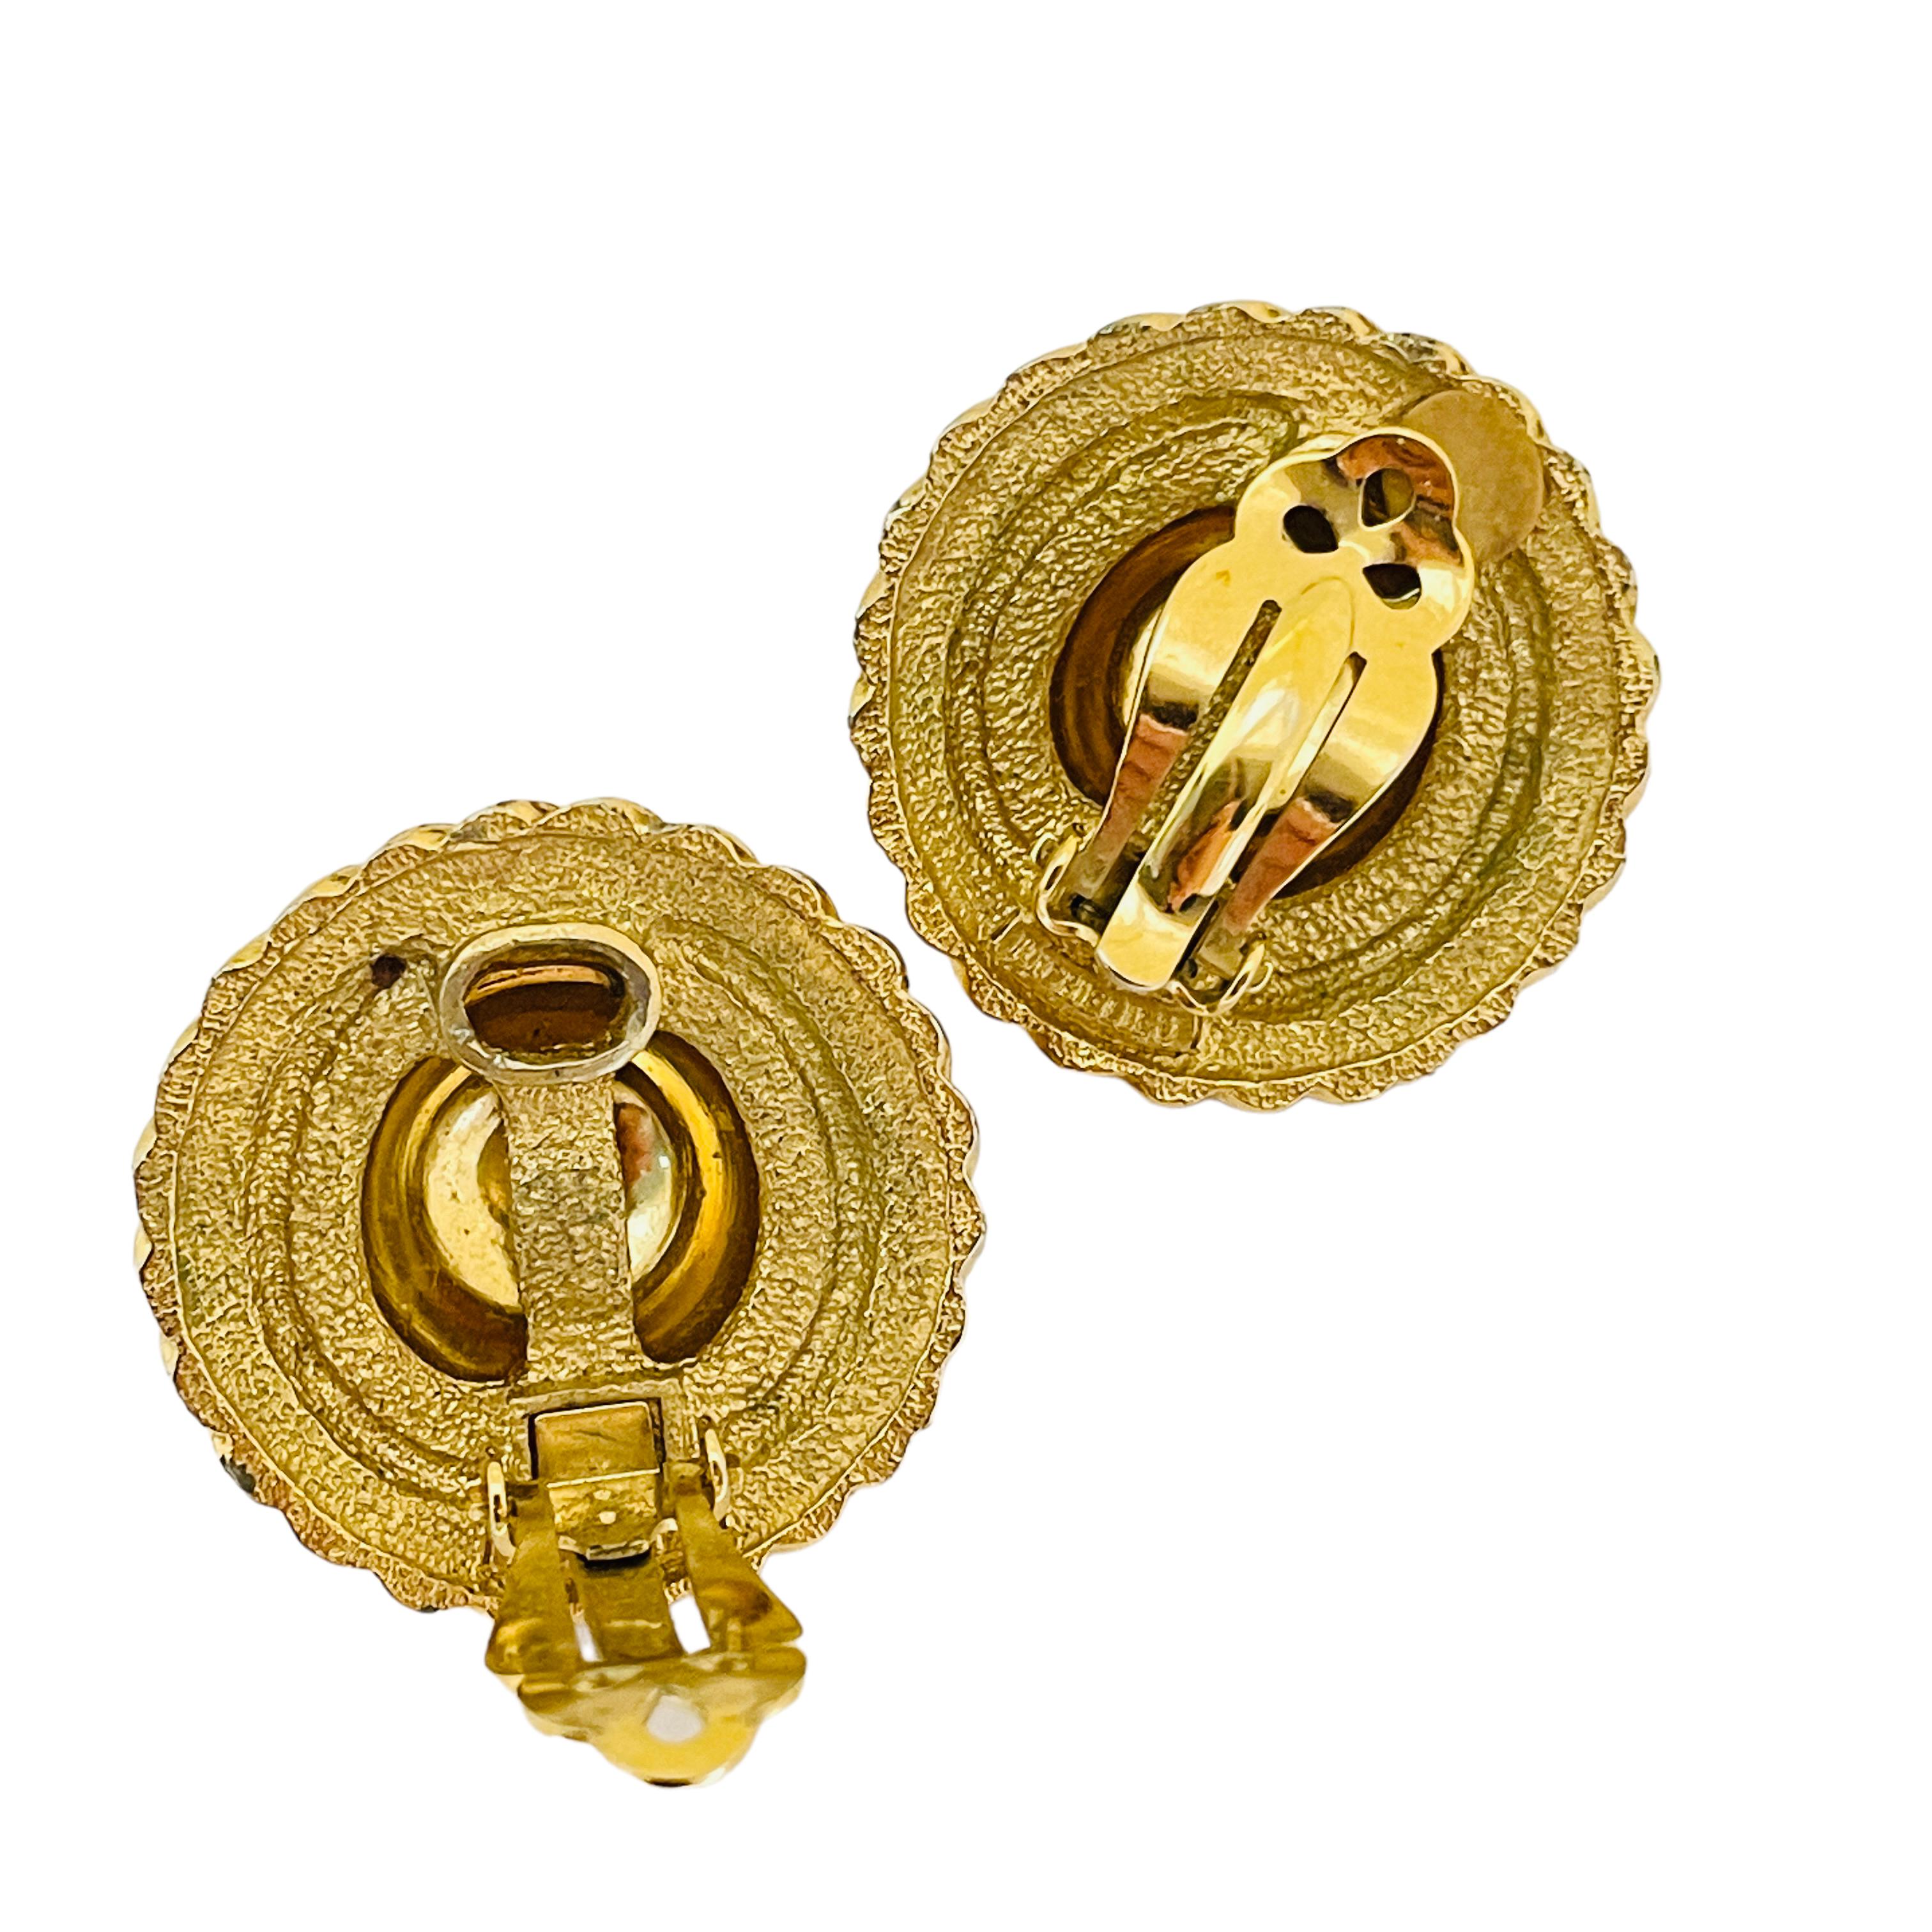 DETAILS

• unsigned

• gold tone 

• vintage designer runway earrings  

MEASUREMENTS  

• 

CONDITION

•  excellent vintage condition with minimal signs of wear 

 SKU 12

❤️❤️   VINTAGE DESIGNER JEWELRY   ❤️❤️